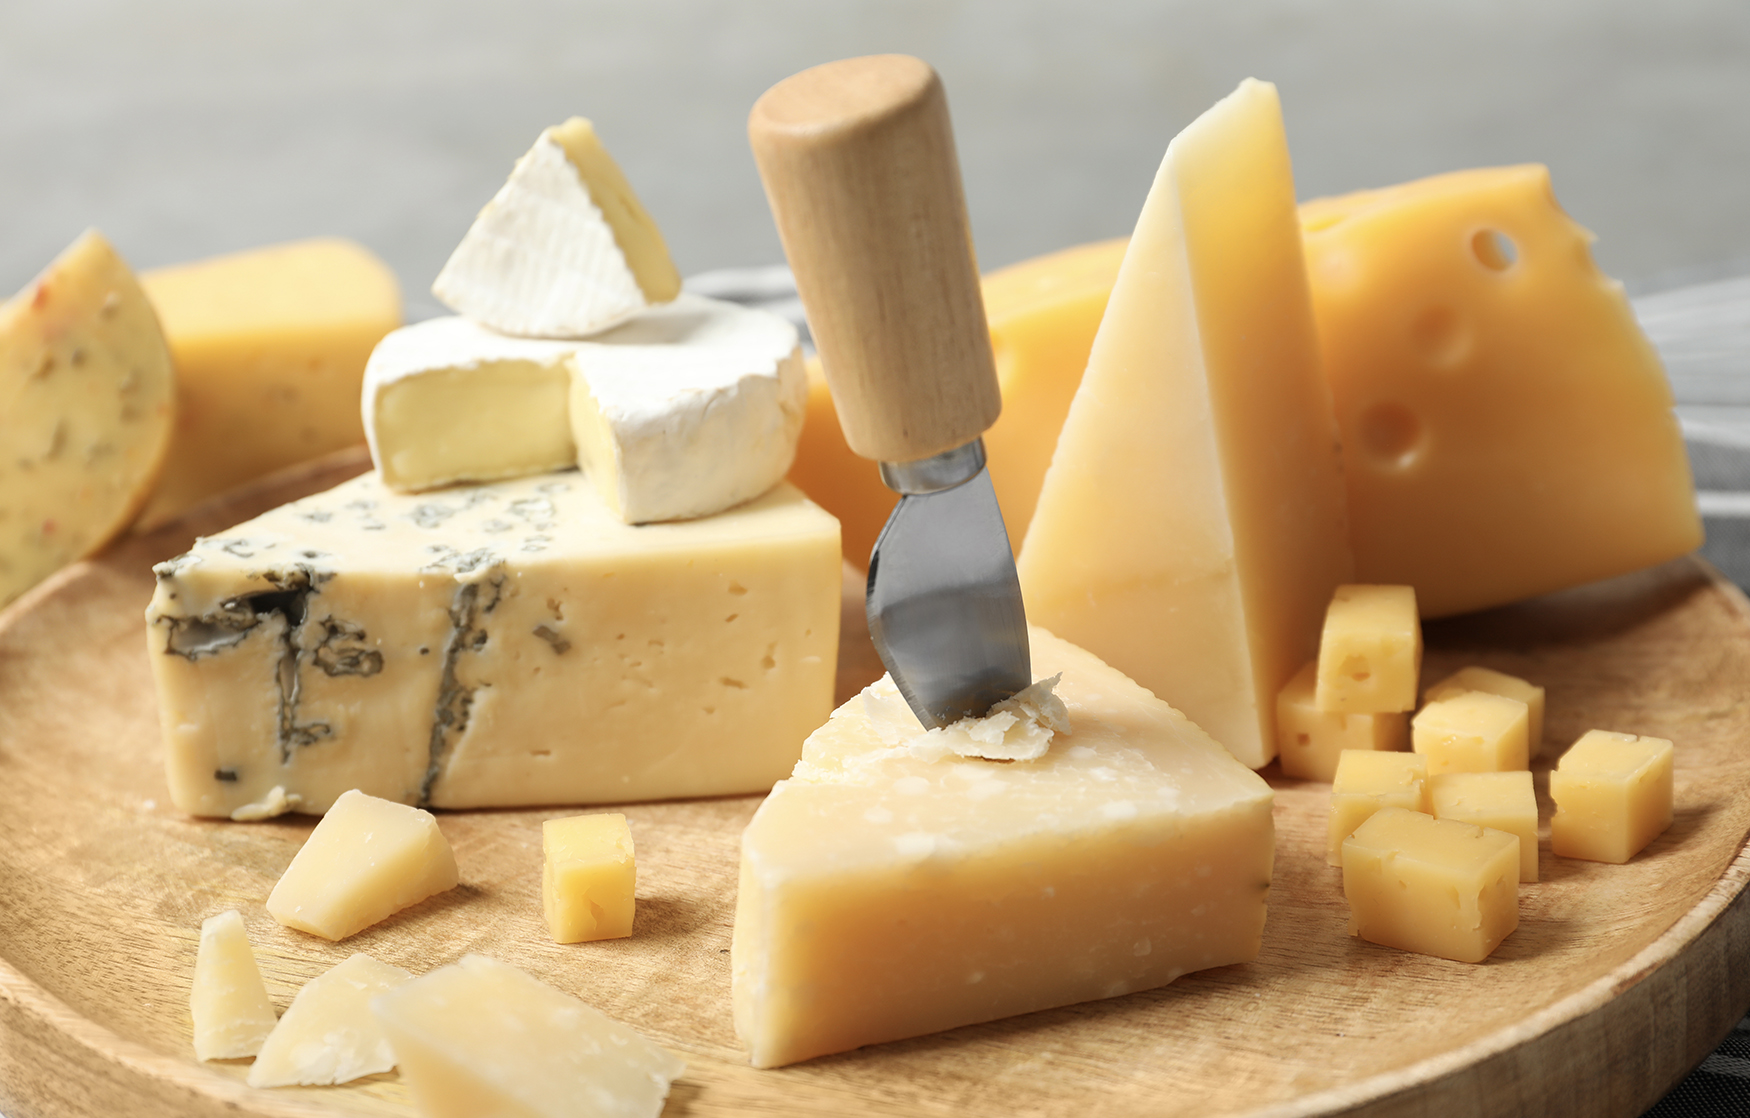 This brand of cheese has been linked to the Listeria outbreak, so throw